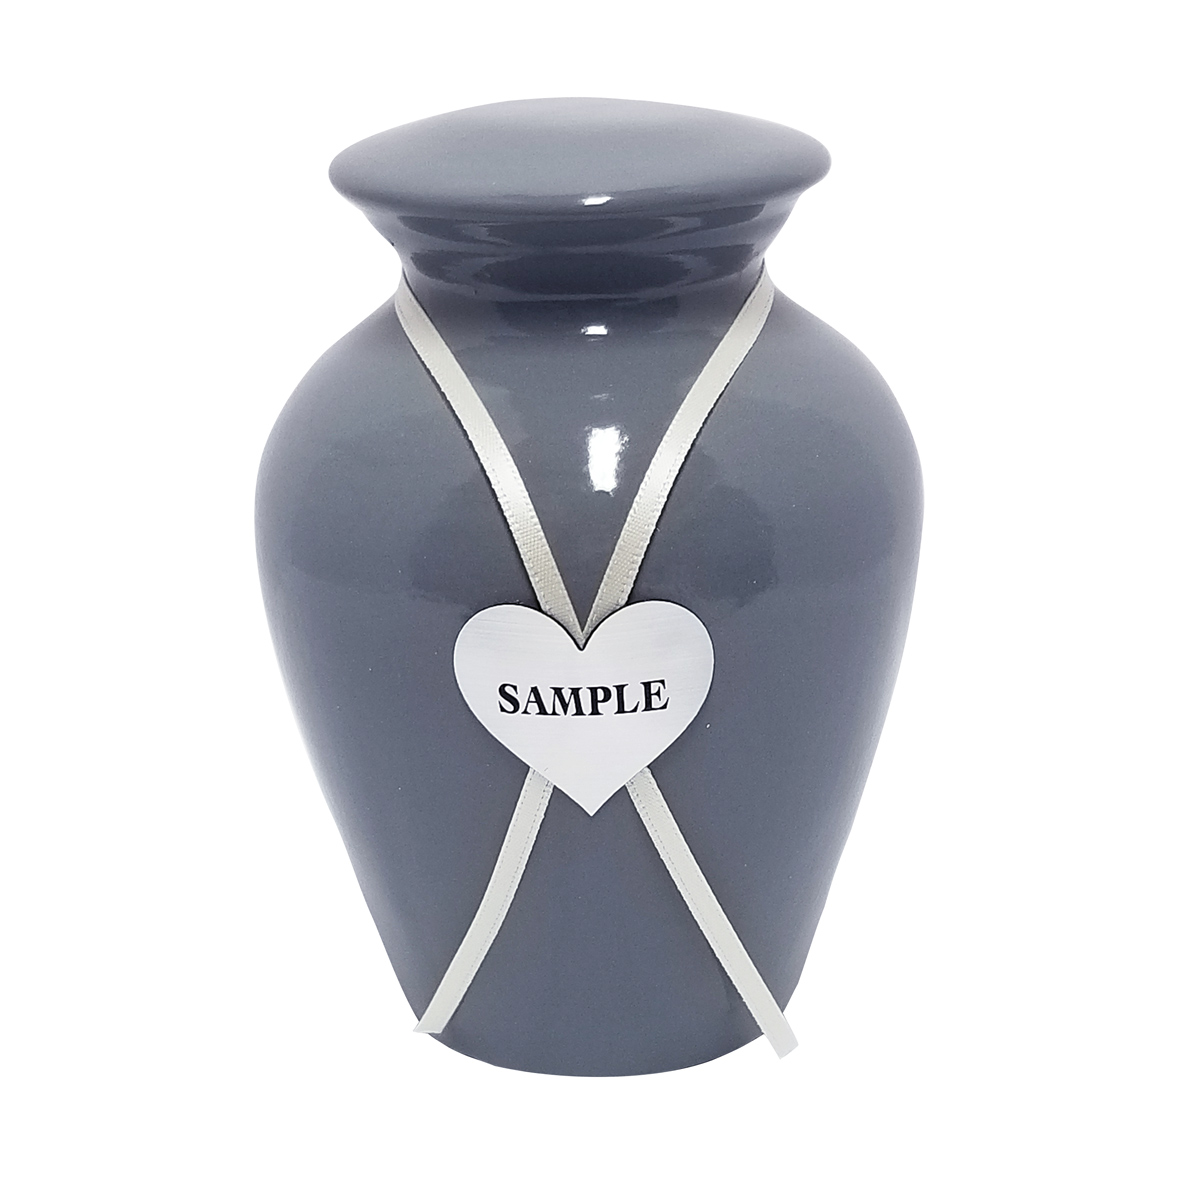 Ceramic Urn with Engraved Heart Plaque